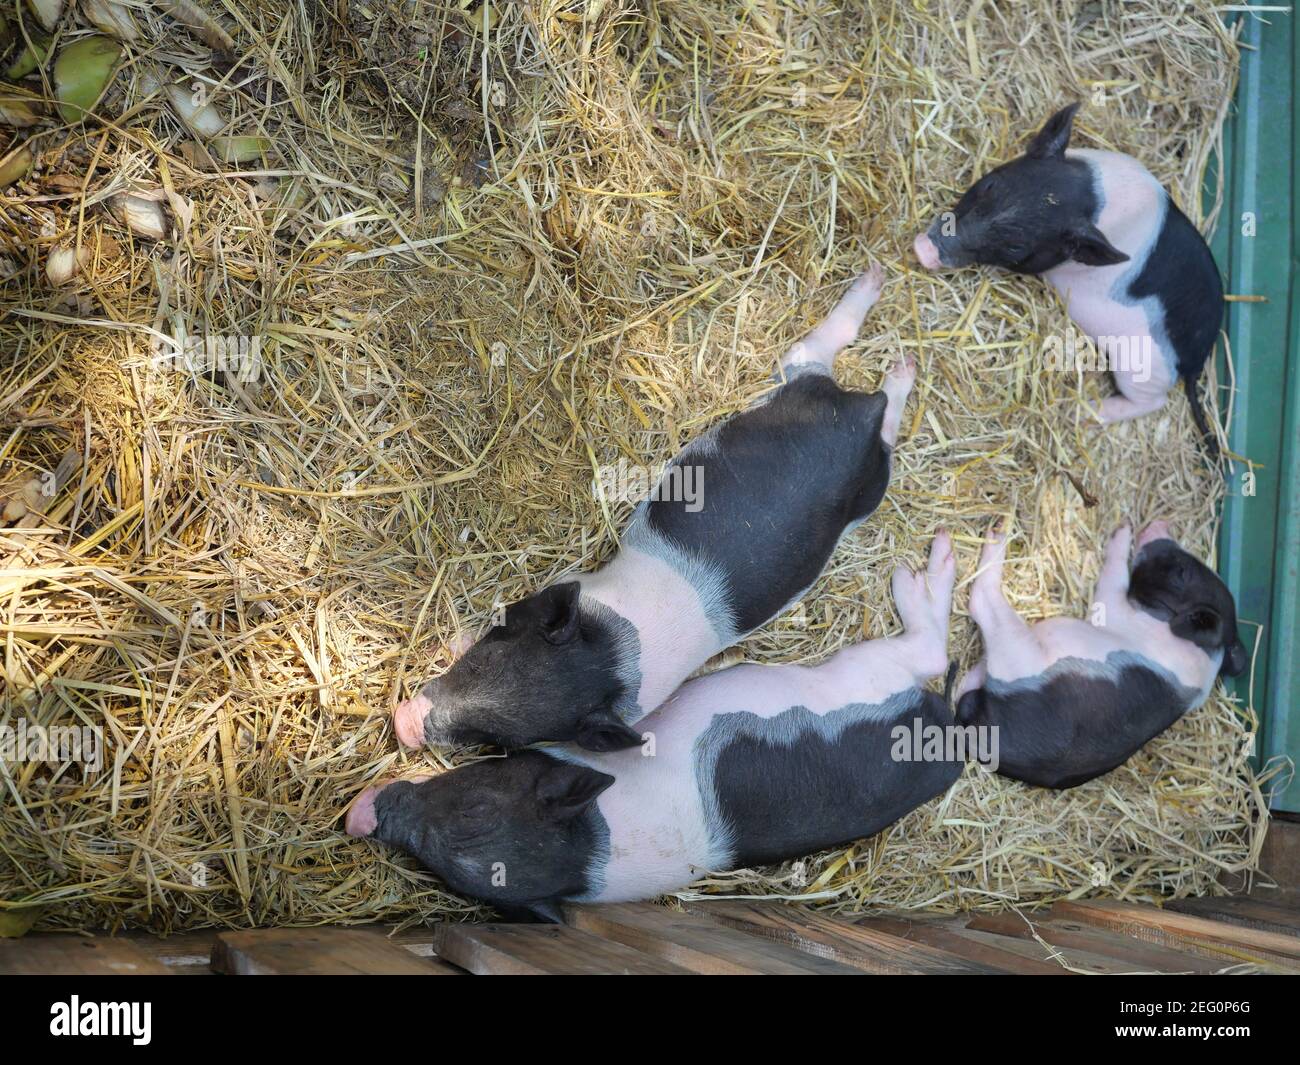 Four baby Vietnamese Pot bellied pigs sleeping on the yellow straw in the stall at farm Stock Photo